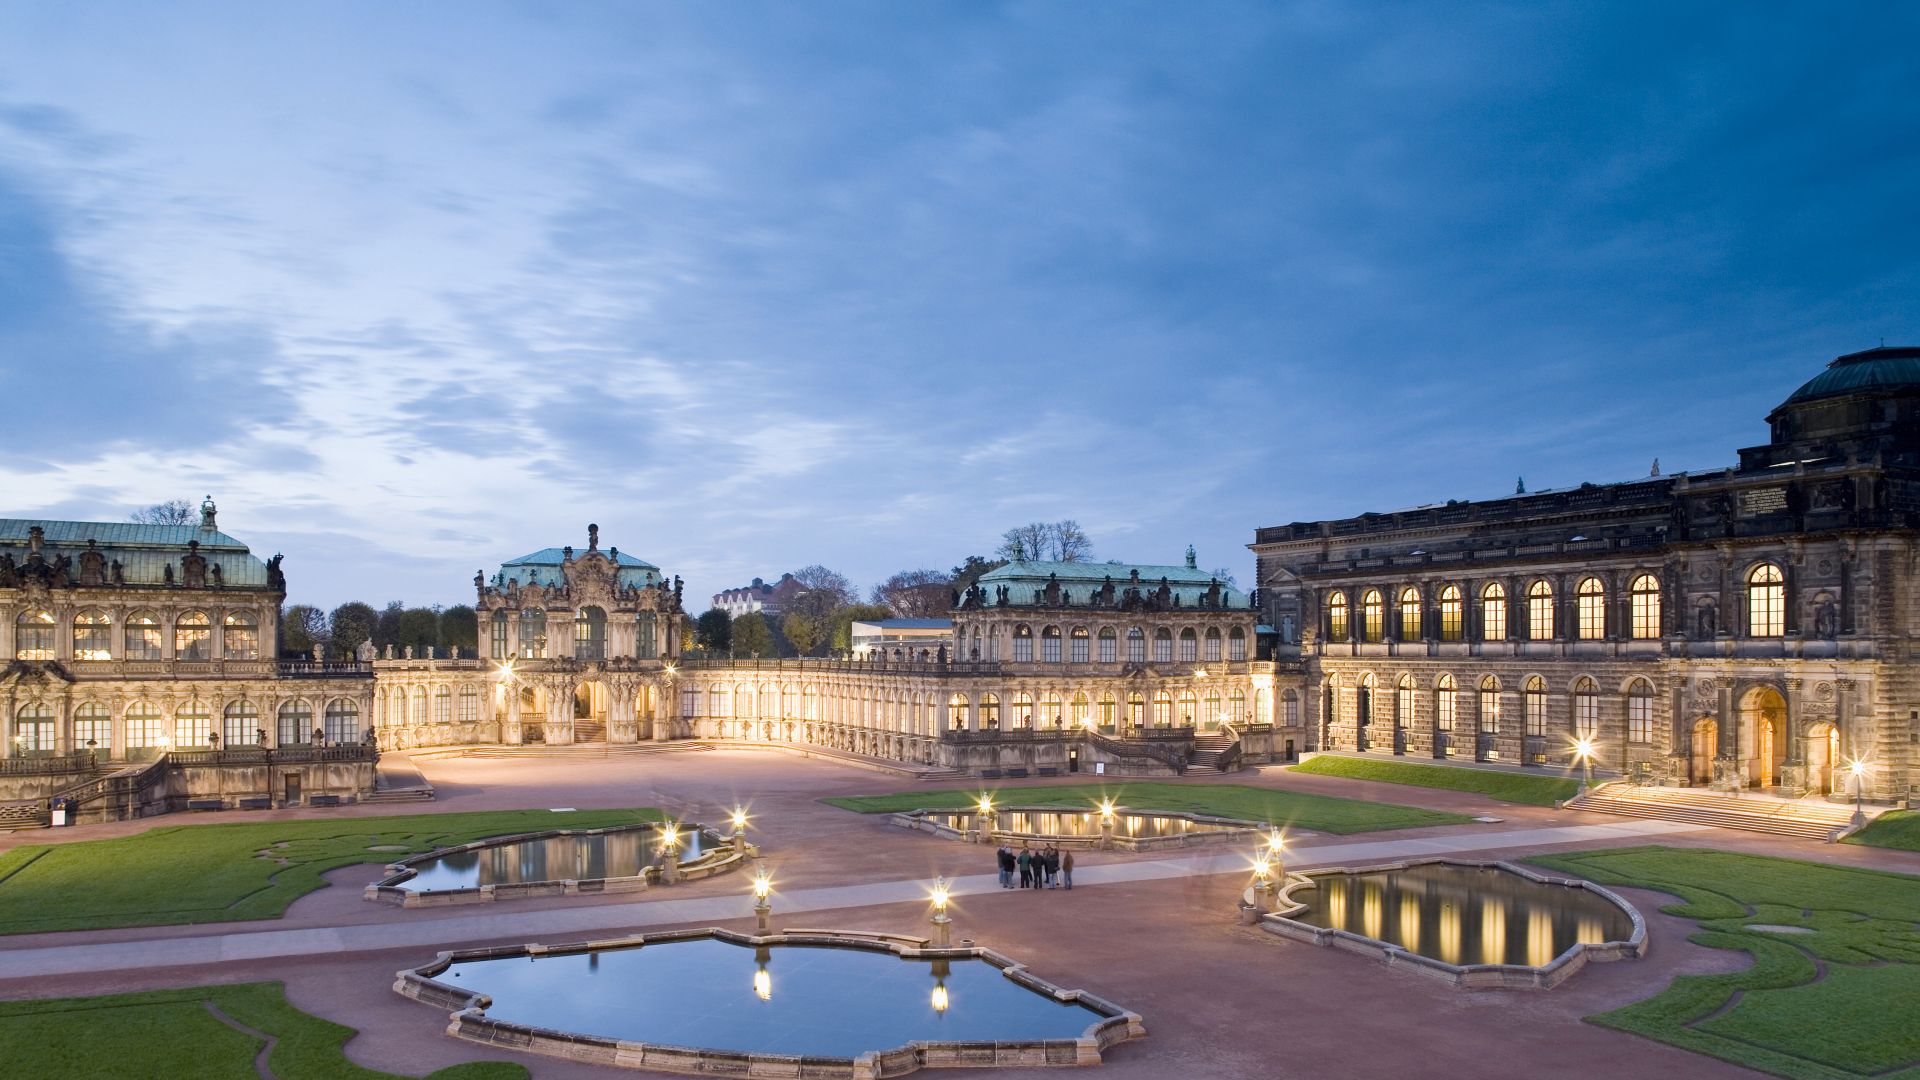 Dresden: Zwinger, rampart pavilion in the evening